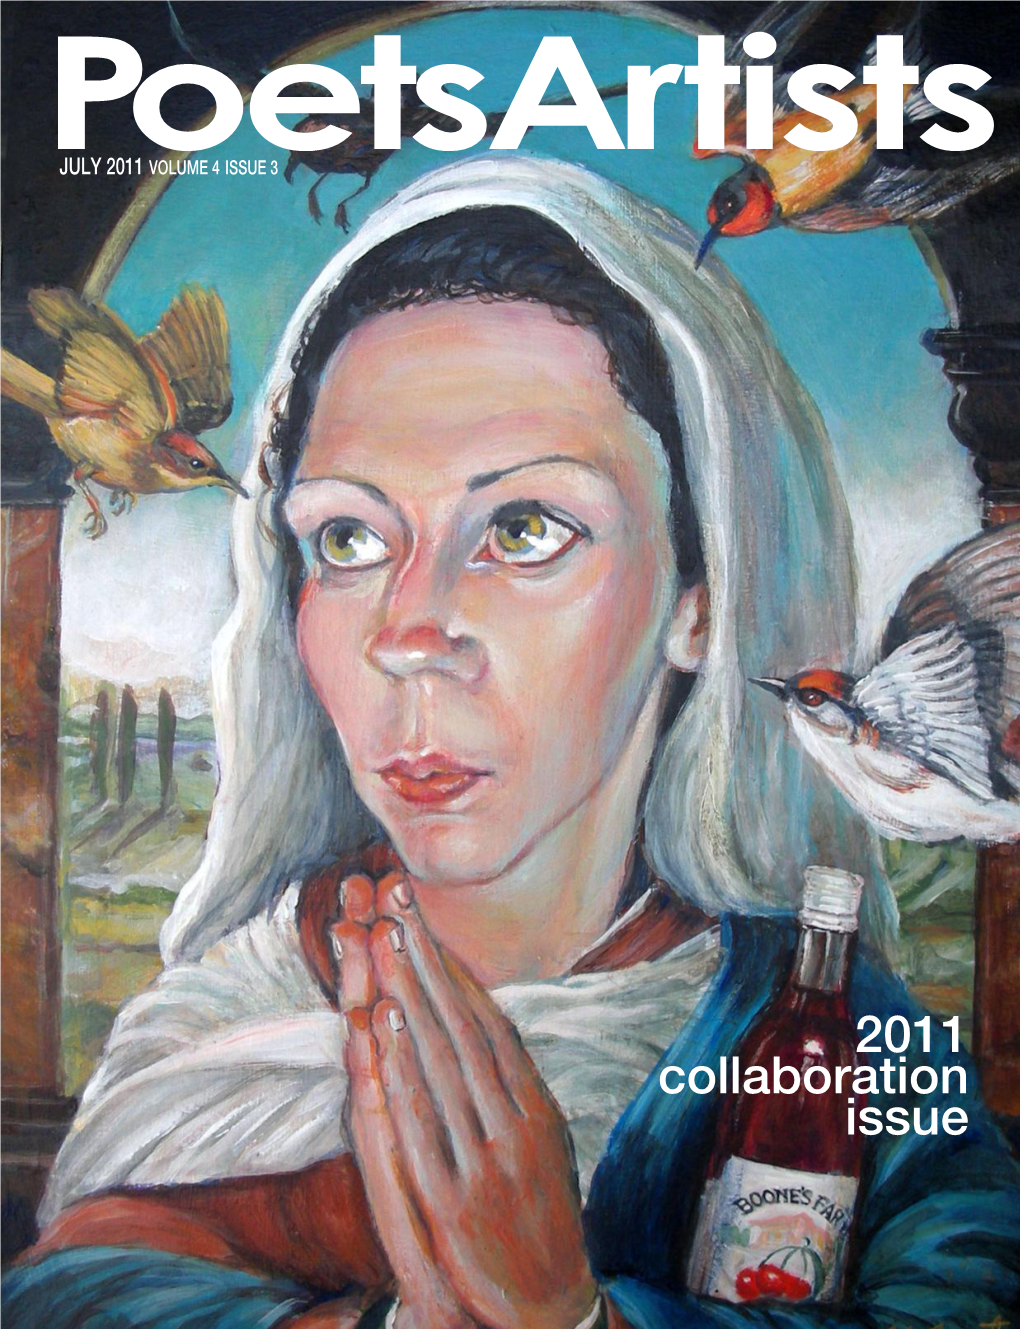 2011 Collaboration Issue